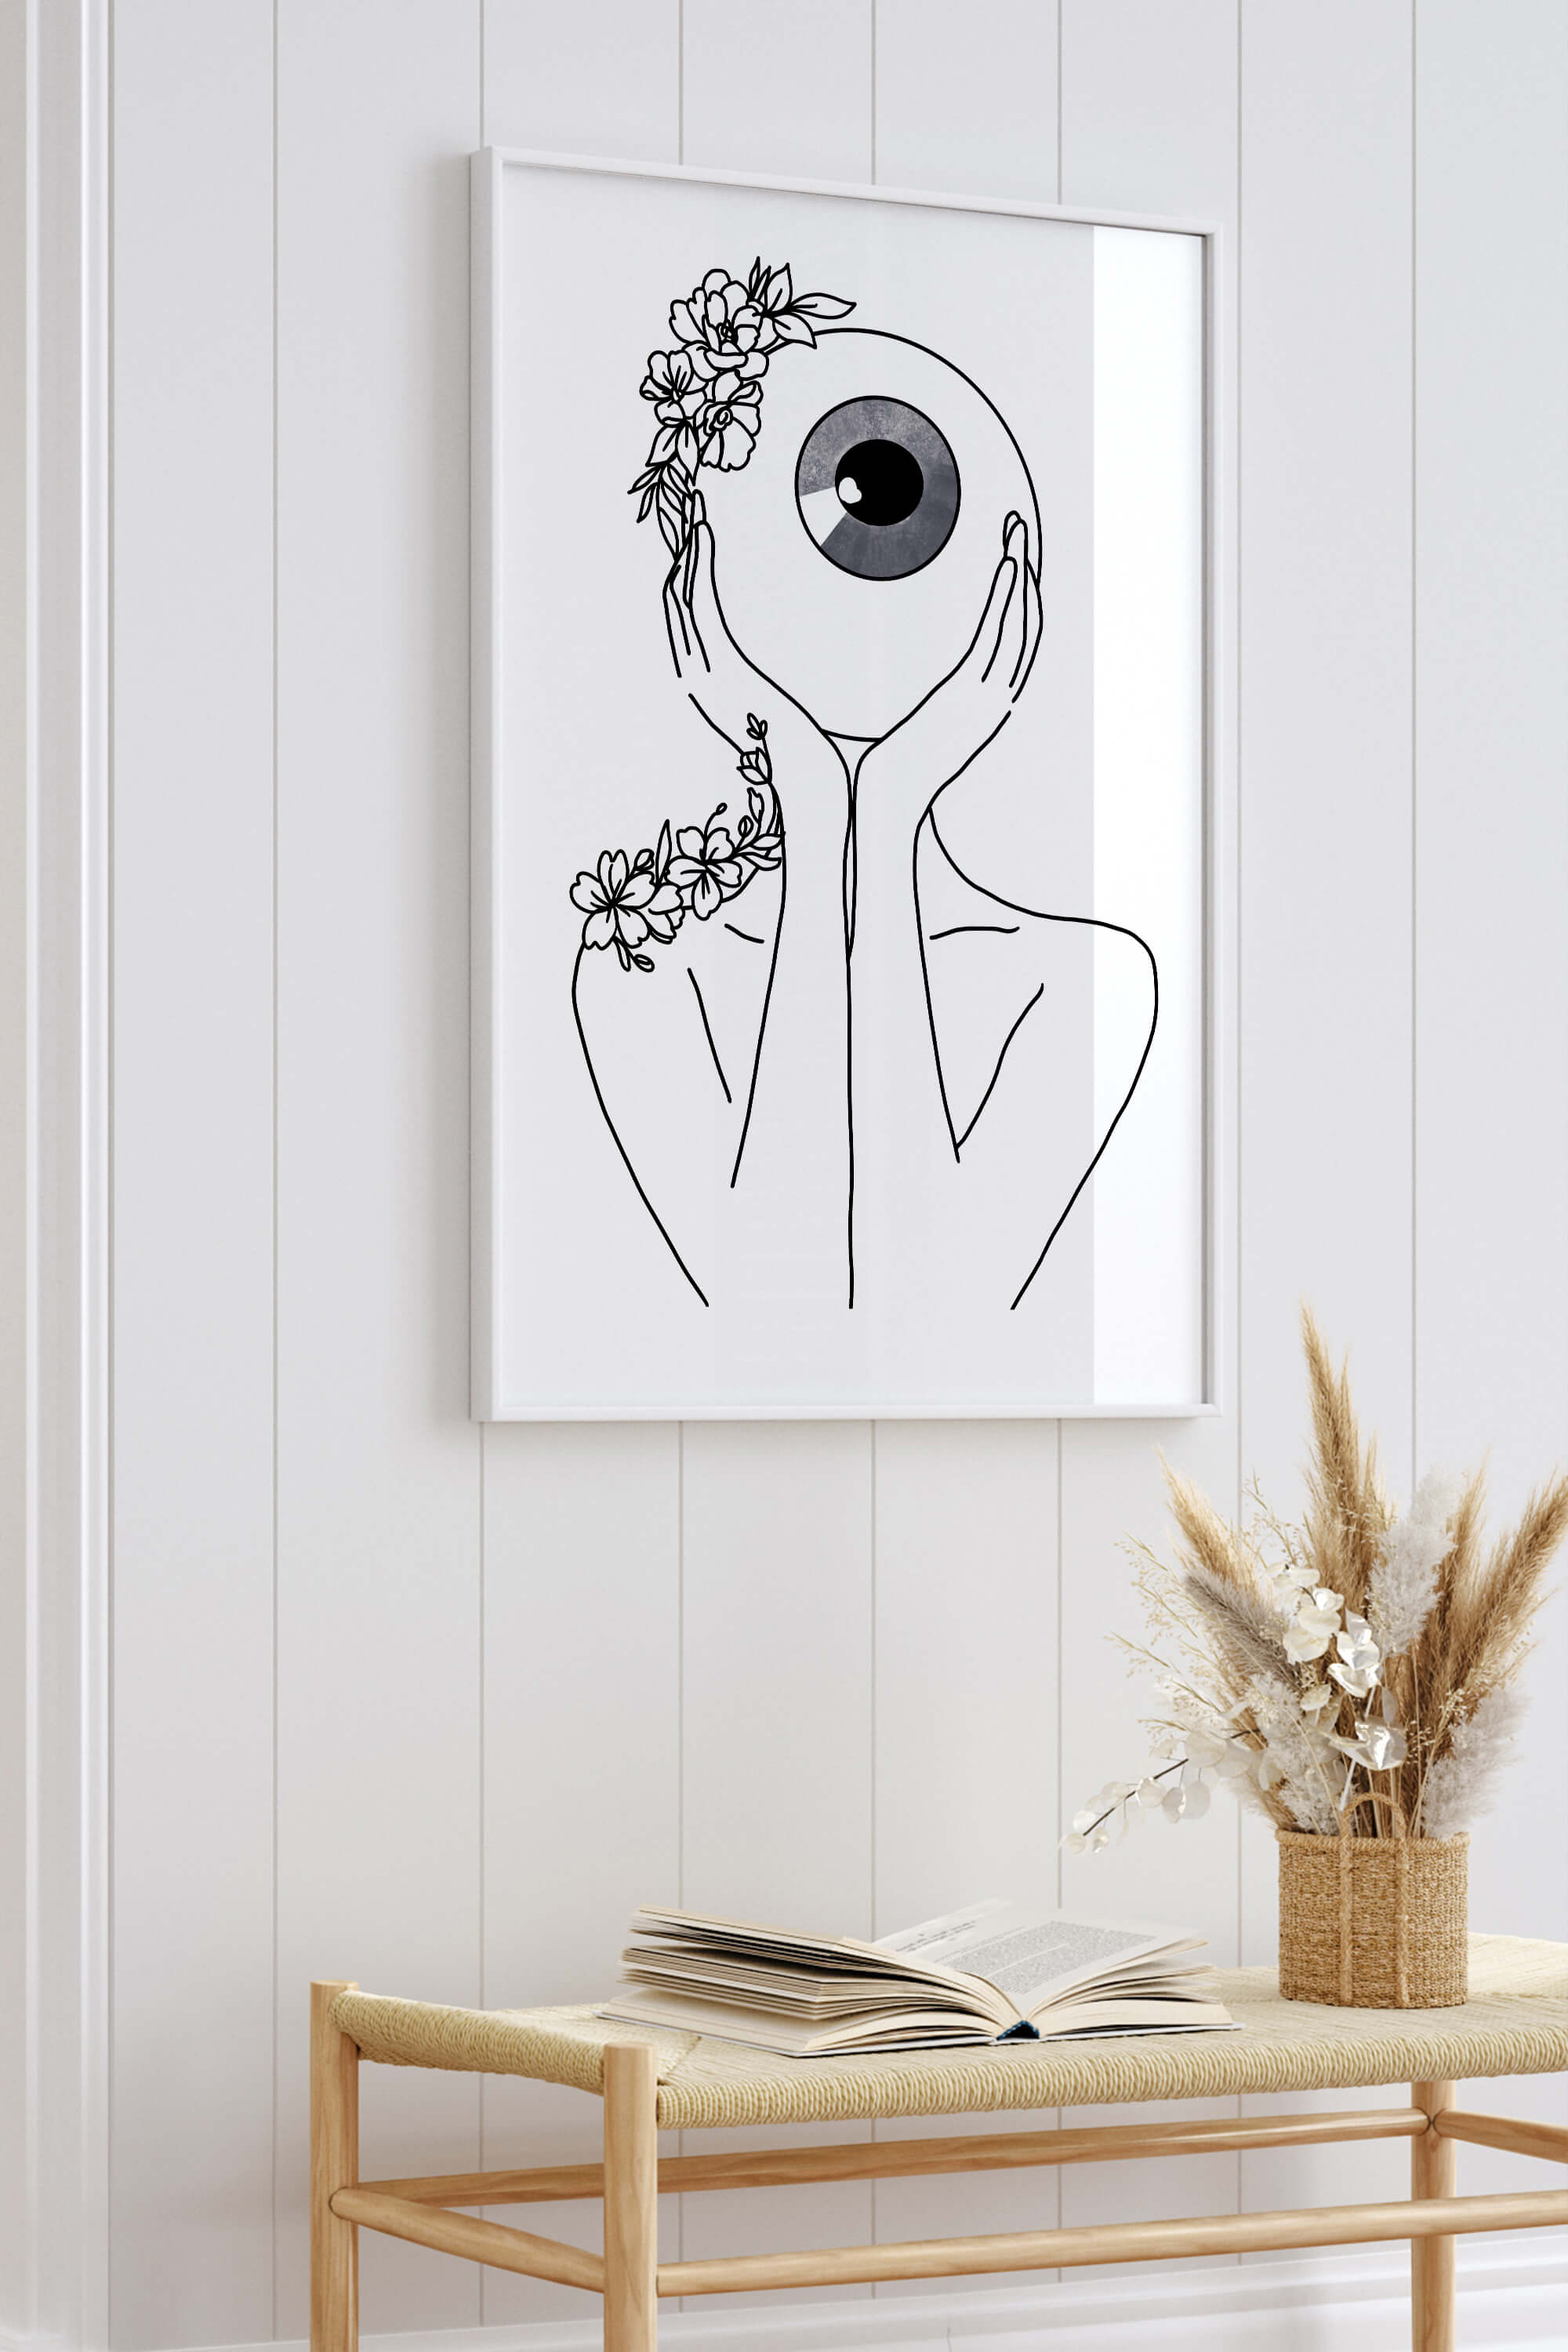 Dive into the abstract world with this striking art print, showcasing a harmonious blend of an abstract woman and an eye ball. The black and white composition exudes modern elegance, making it an eye-catching piece for diverse interior styles.